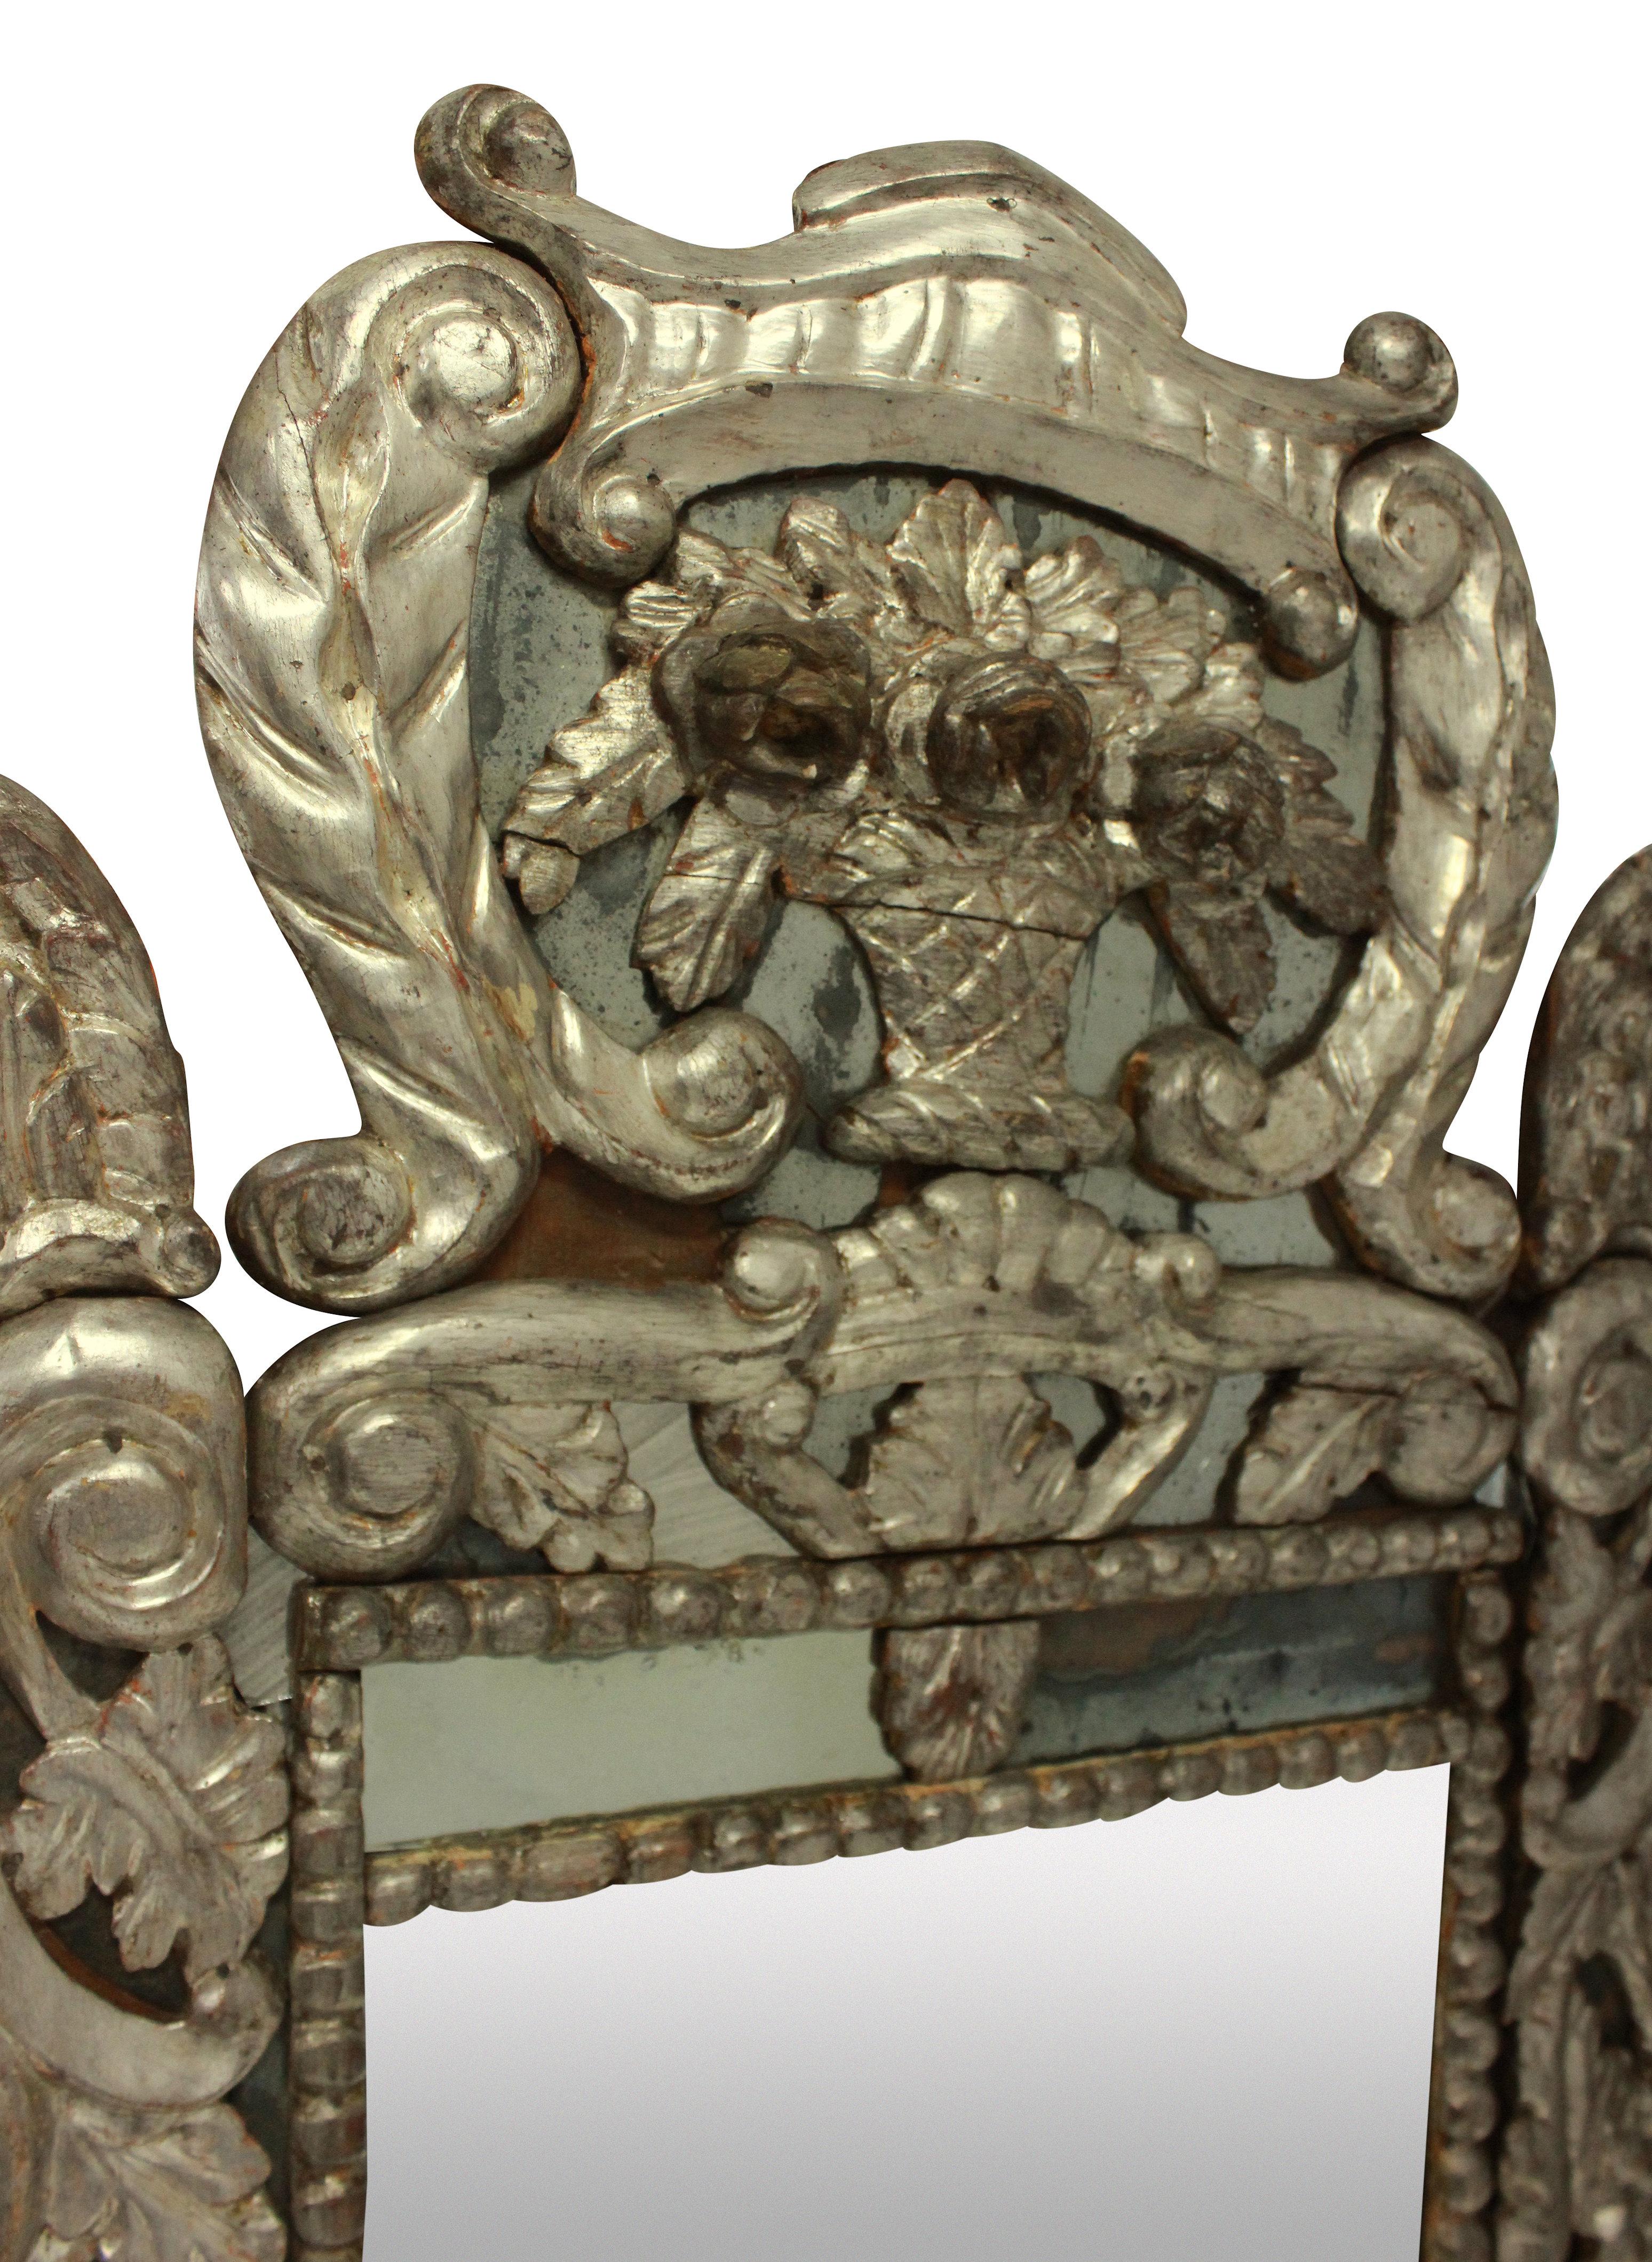 An 18th century carved Venetian mirror in silver leaf, with the original mercury glass. Some minor losses.